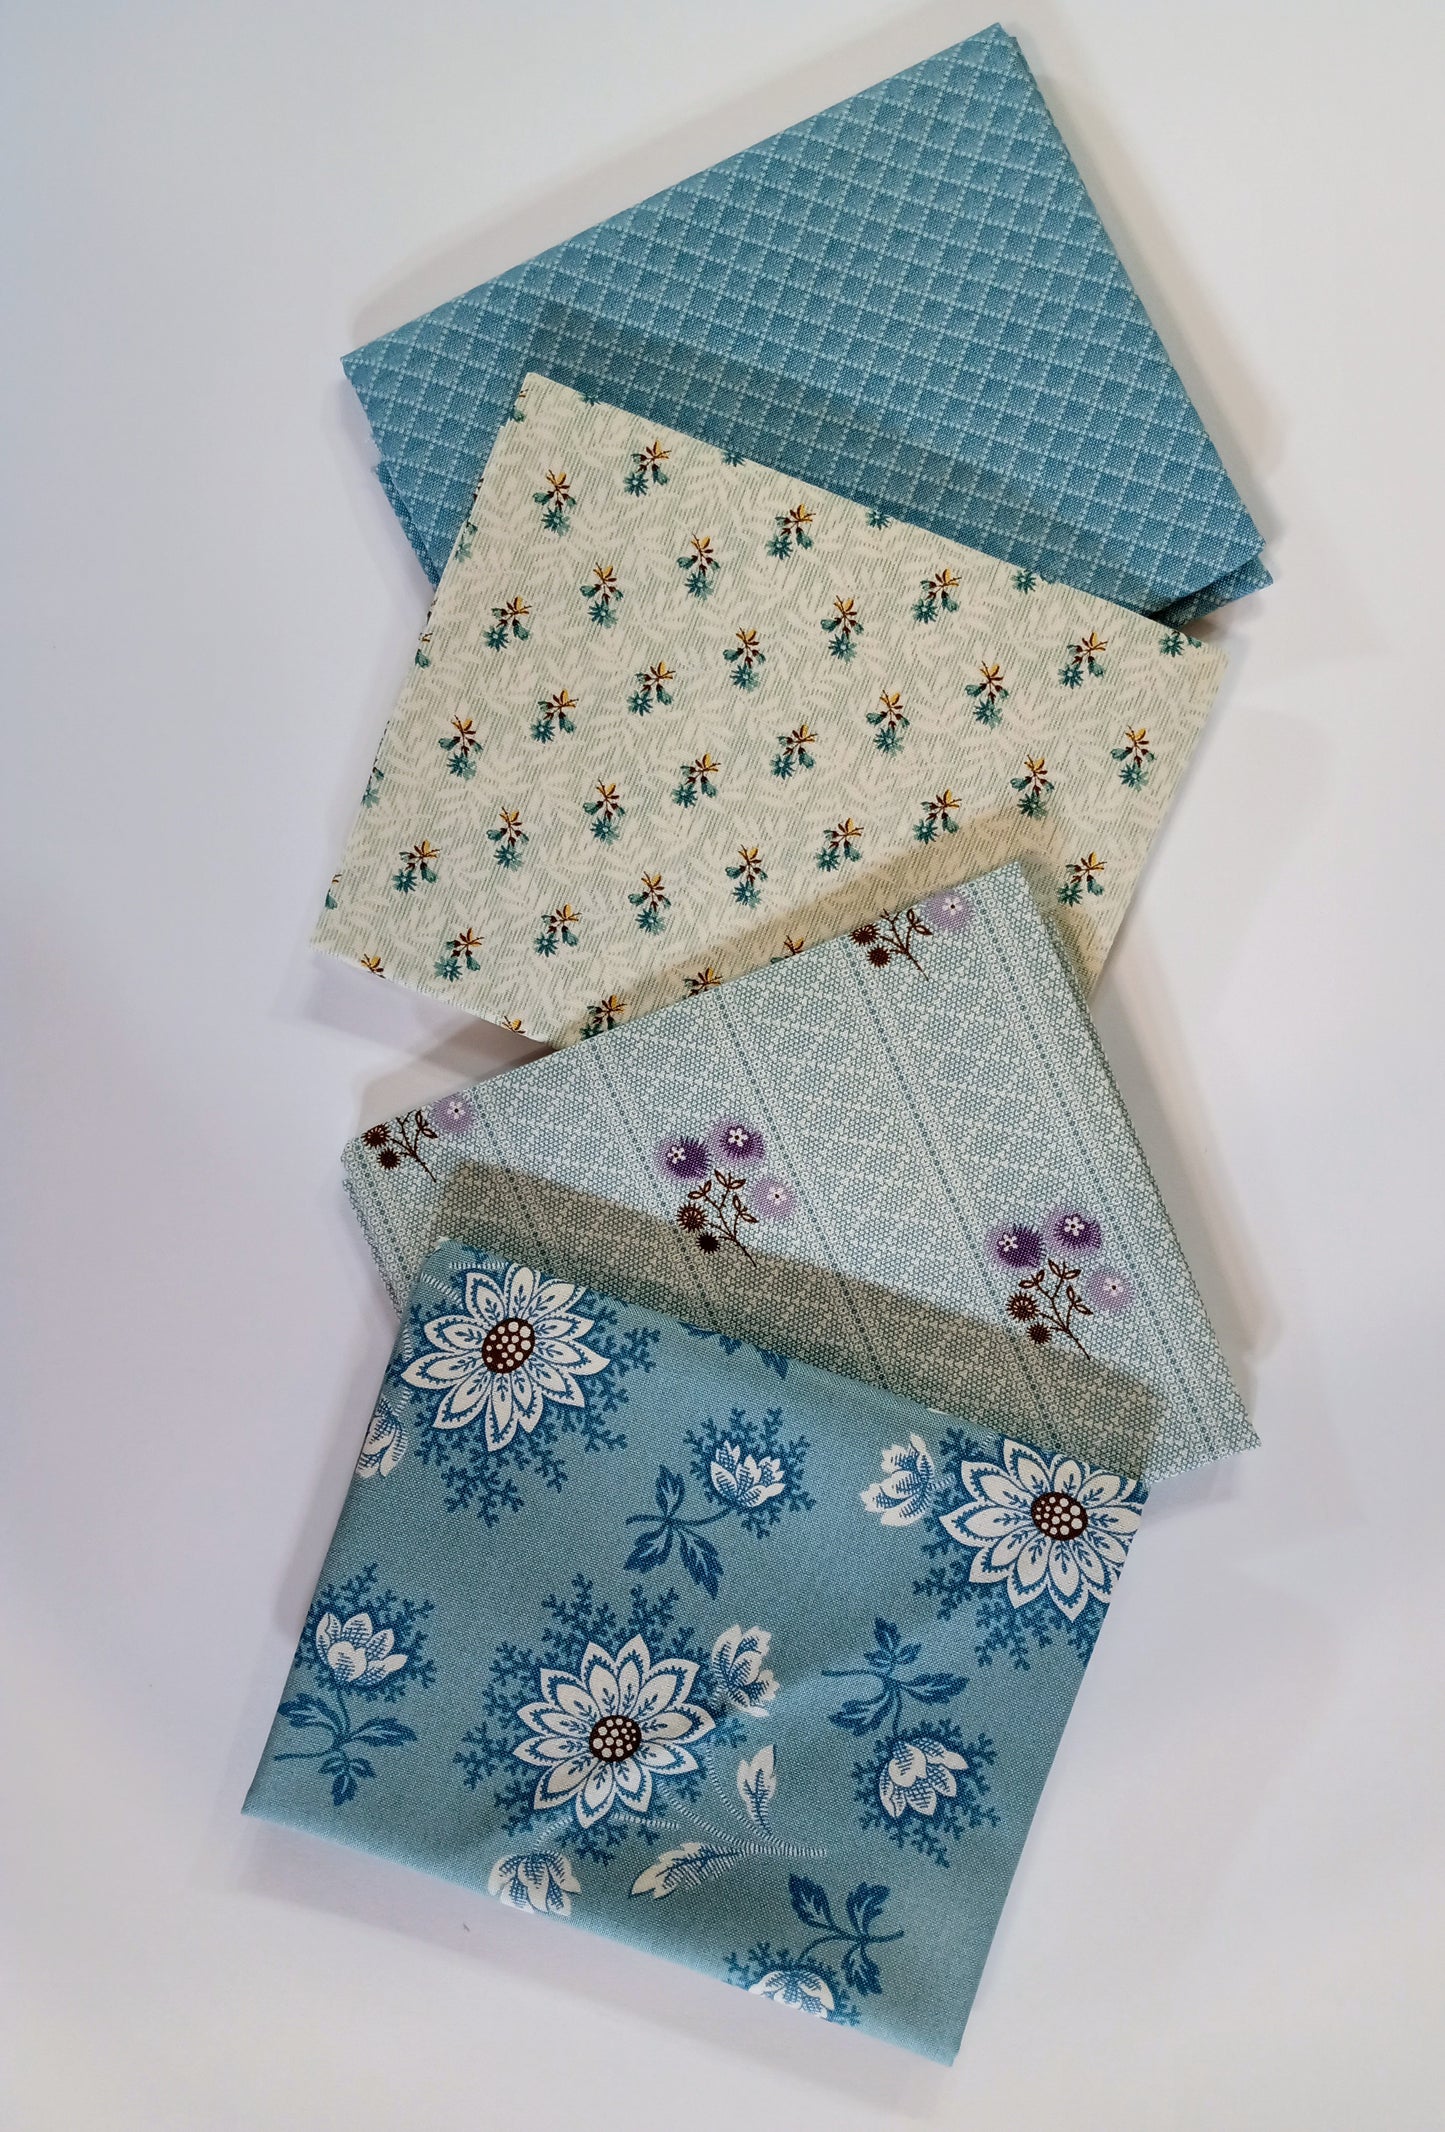 Sienna - Fat Quarter (28) - Licence To Quilt